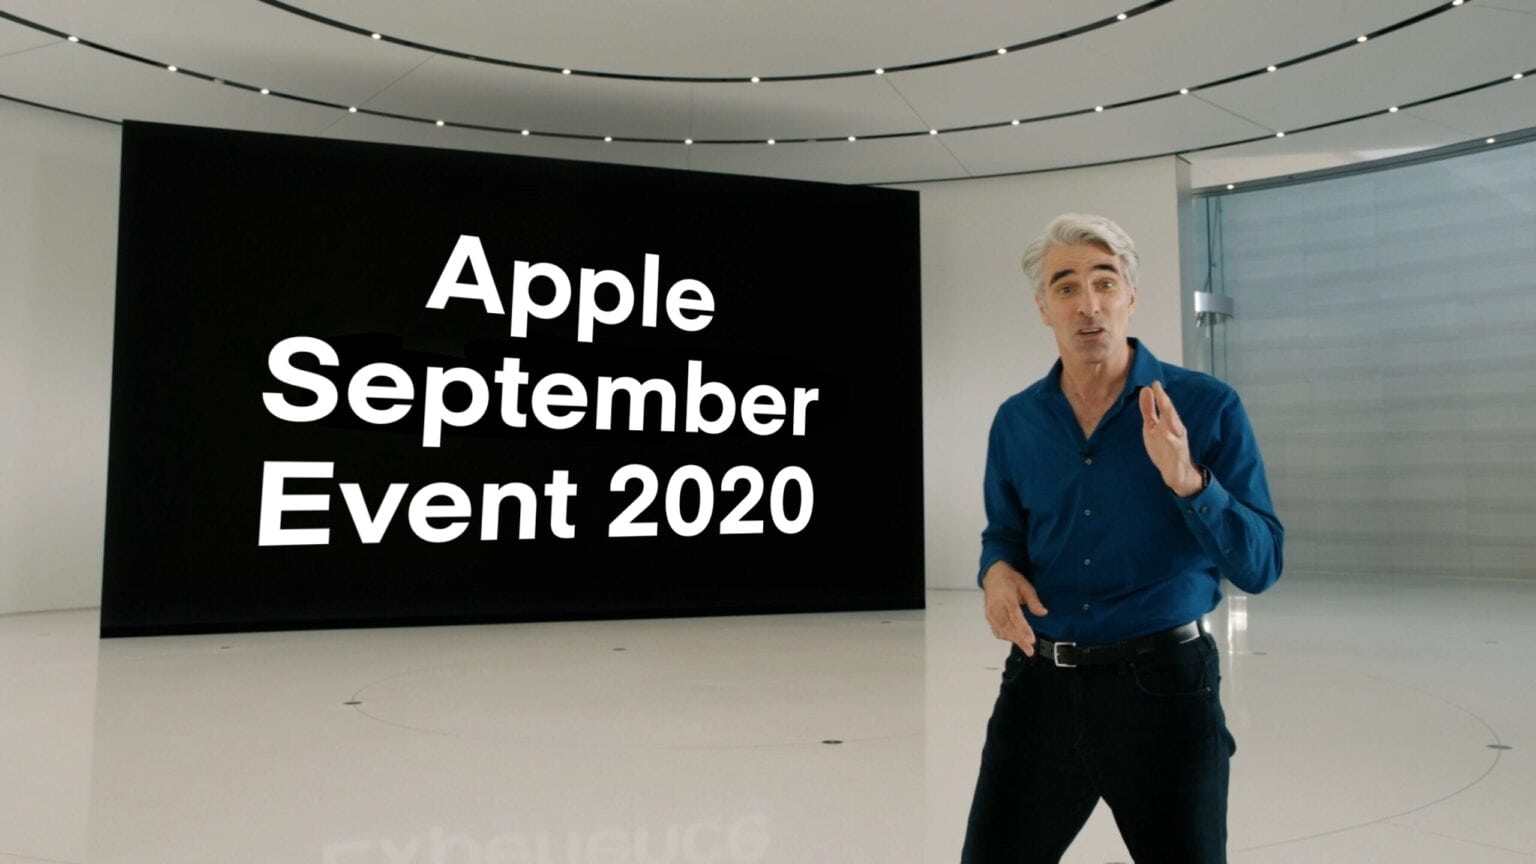 The Apple September Event 2020 will surely take advantage of its virtual nature.